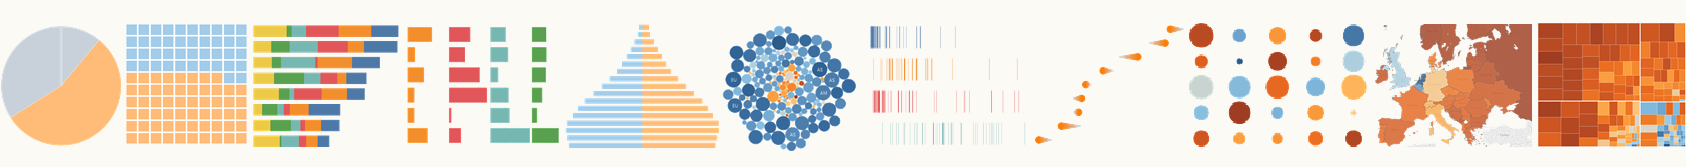 Data visualization for office users